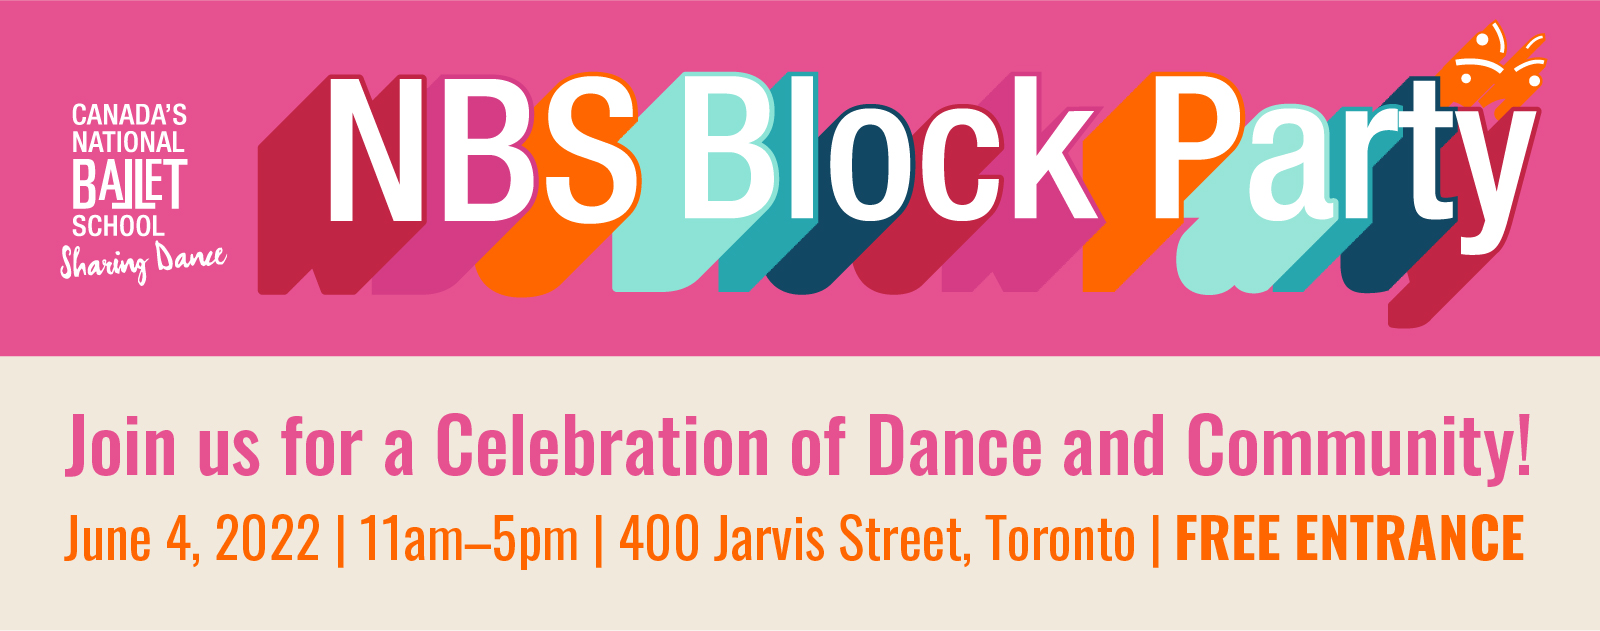 NBS Block Party Event